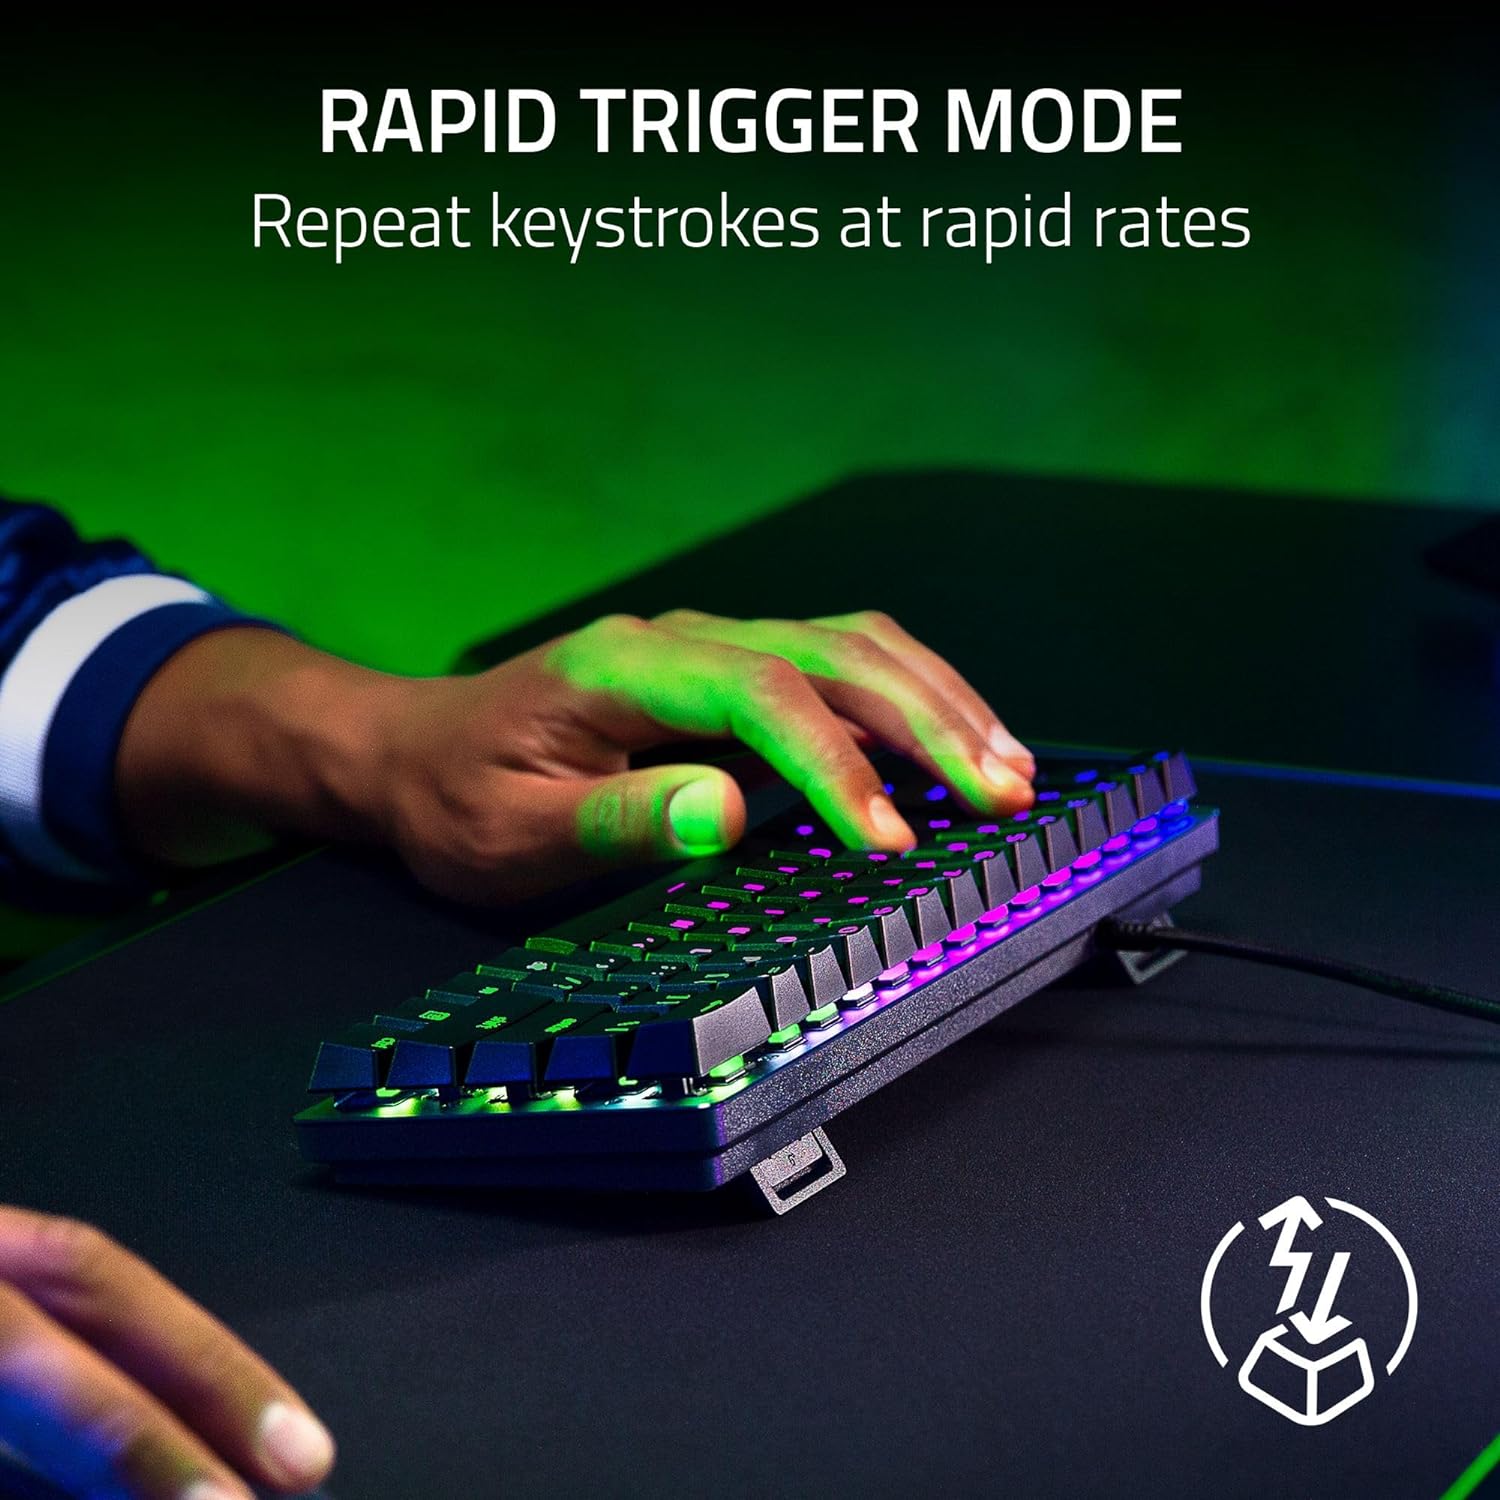 Razer Huntsman Mini 60% Gaming Keyboard: Analog Optical Switches - Doubleshot PBT Keycaps - Chroma RGB - Onboard Memory - Portable 60 Percent Form Factor - Detachable Type-C Cable - Classic Black